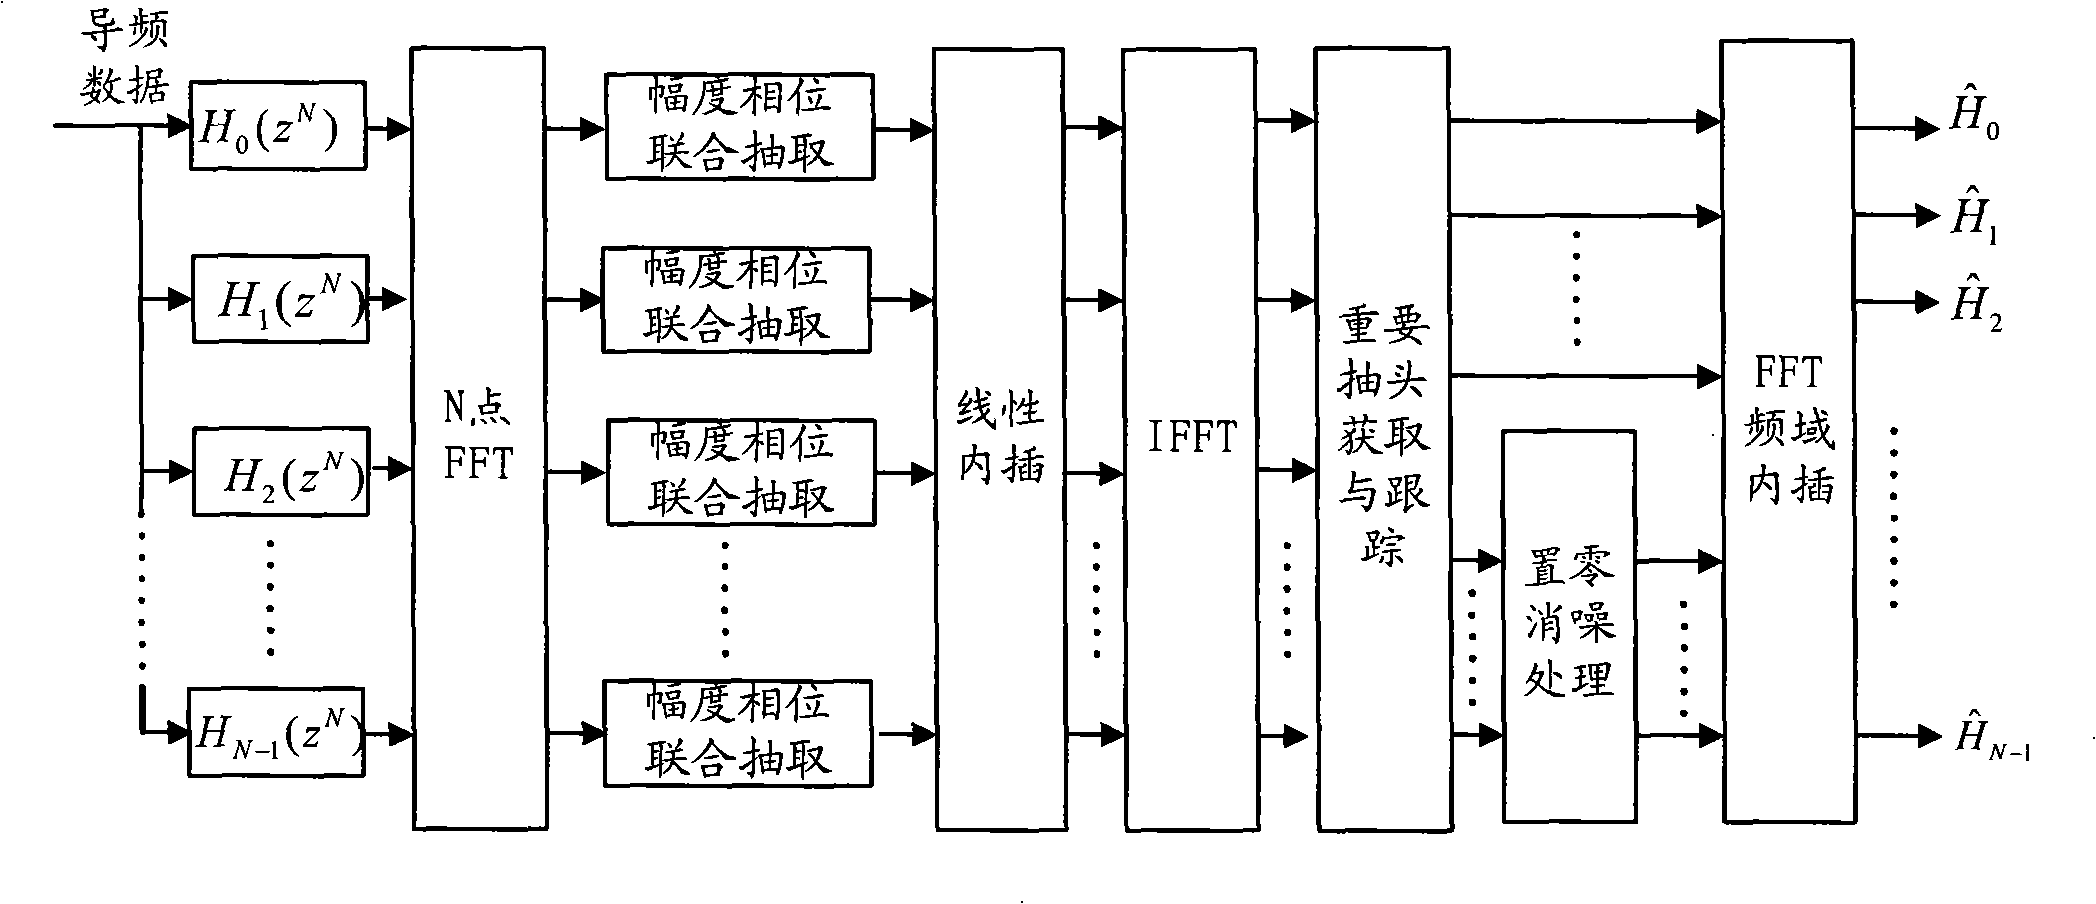 An OFDM time shift channel measuring method